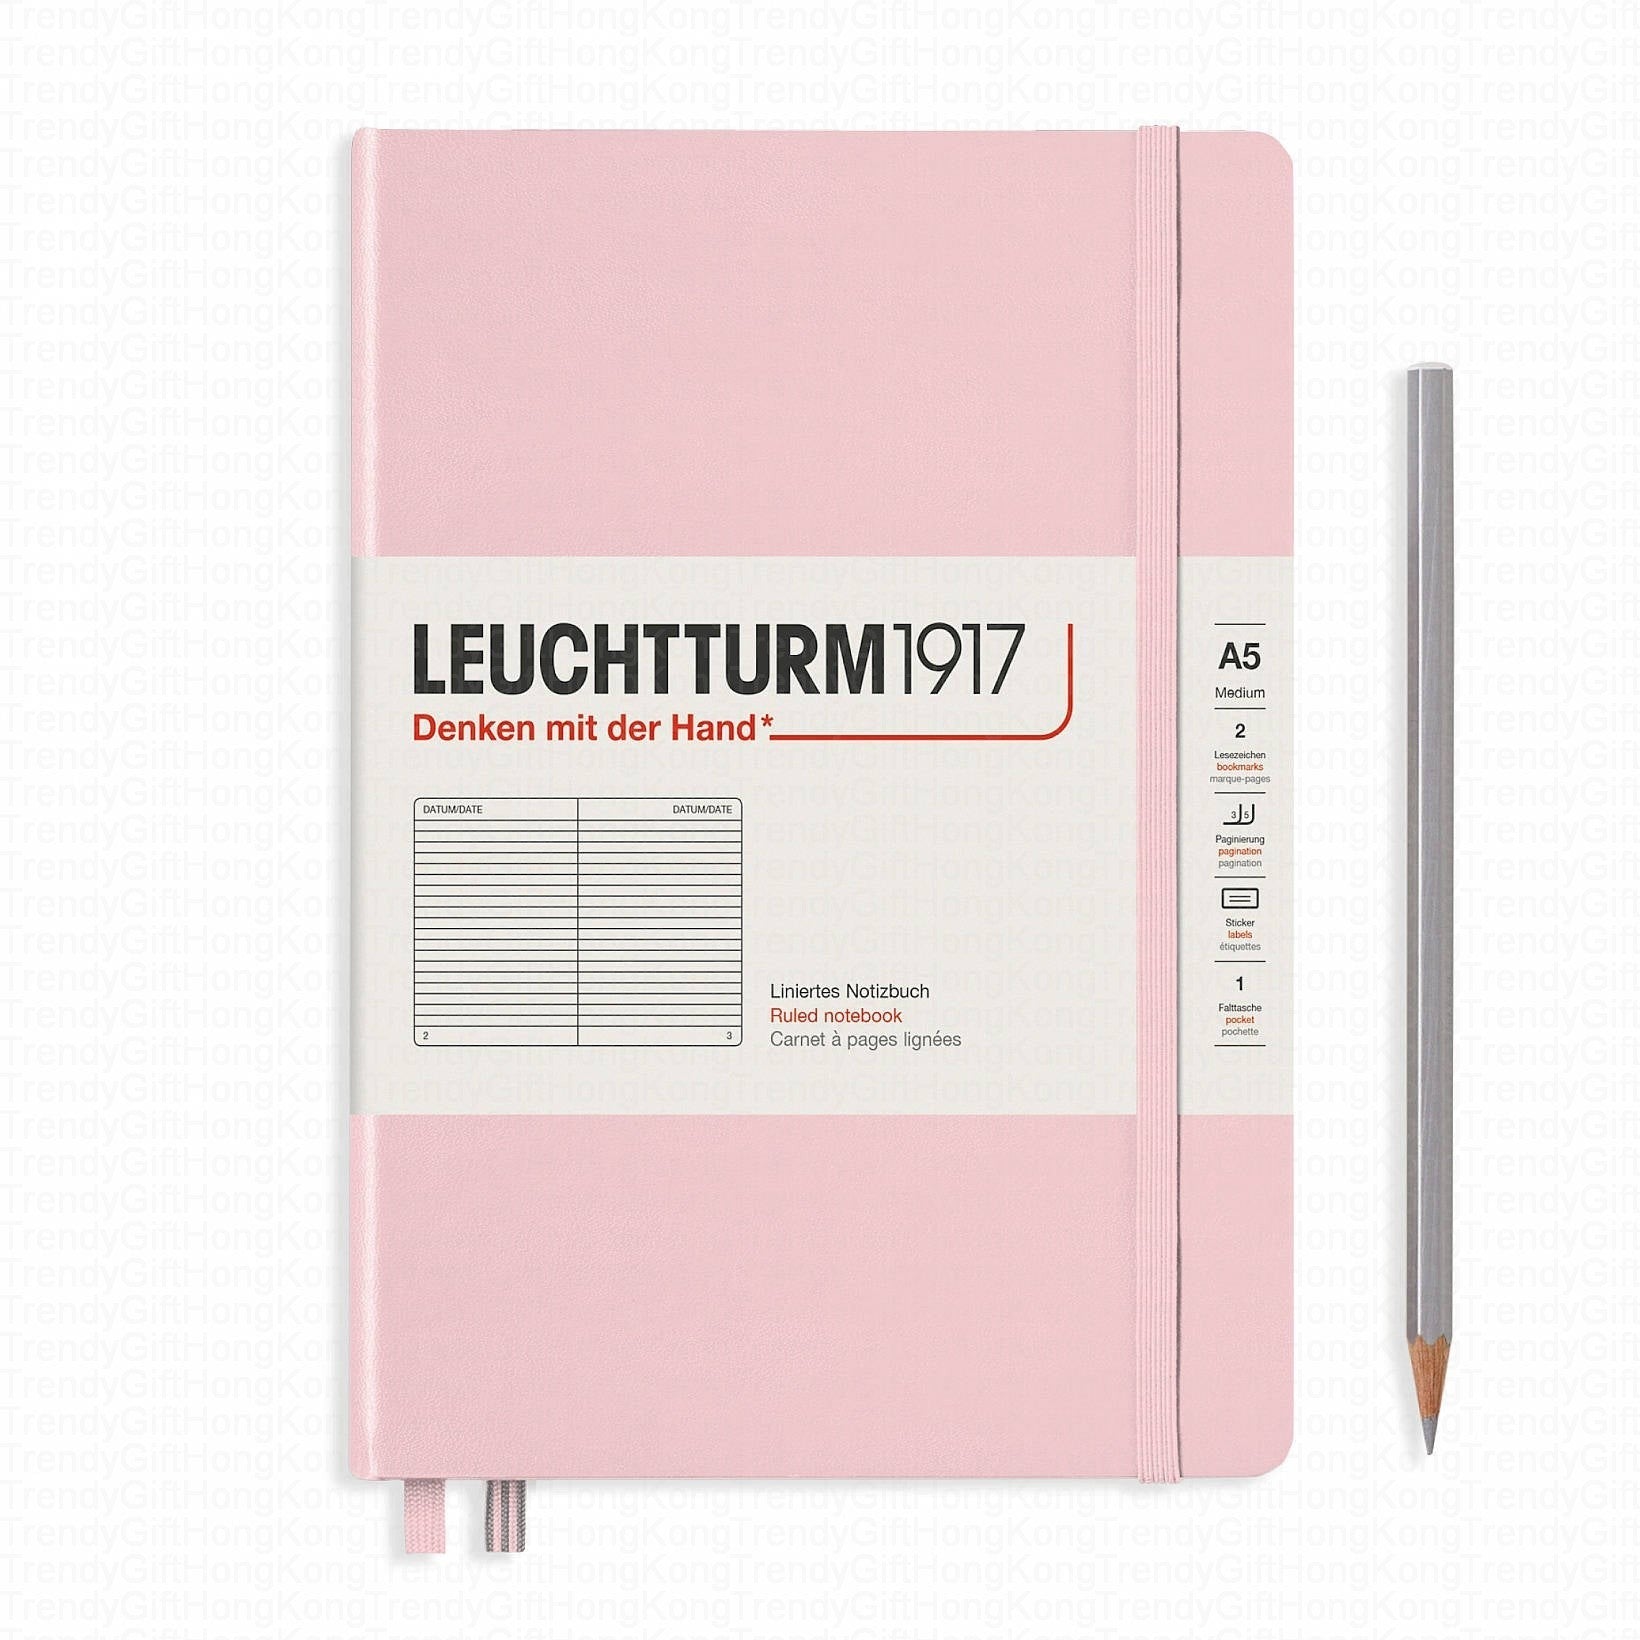 Leuchtturm 1917 Notebook Medium A5 Hardcover, 249 Numbered Pages trendygifthk